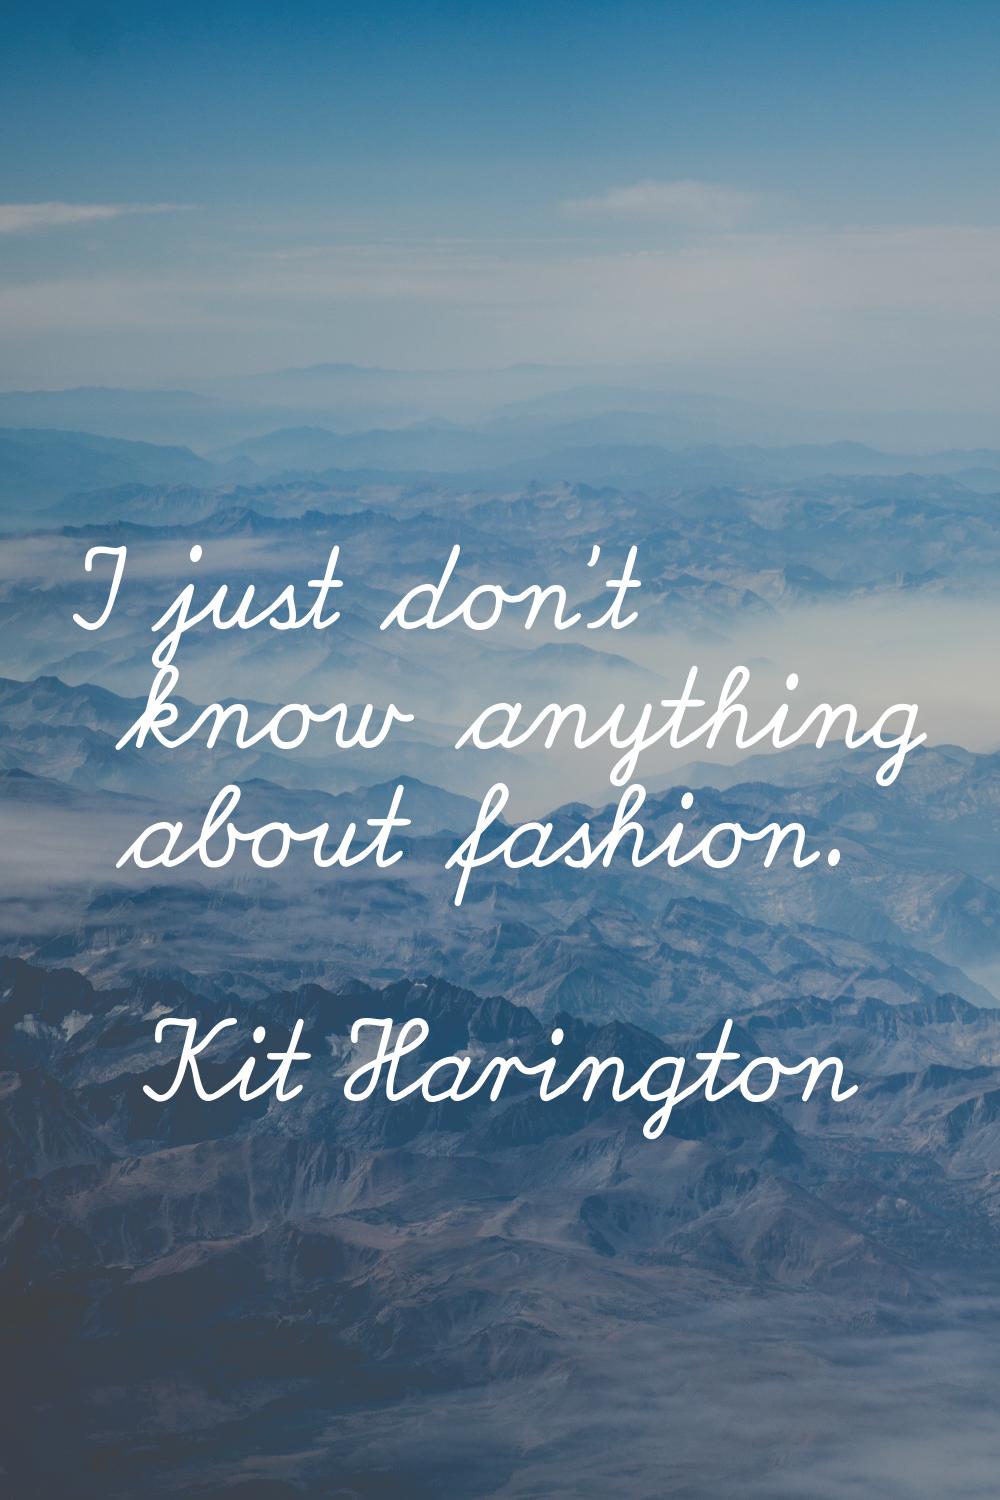 I just don't know anything about fashion.